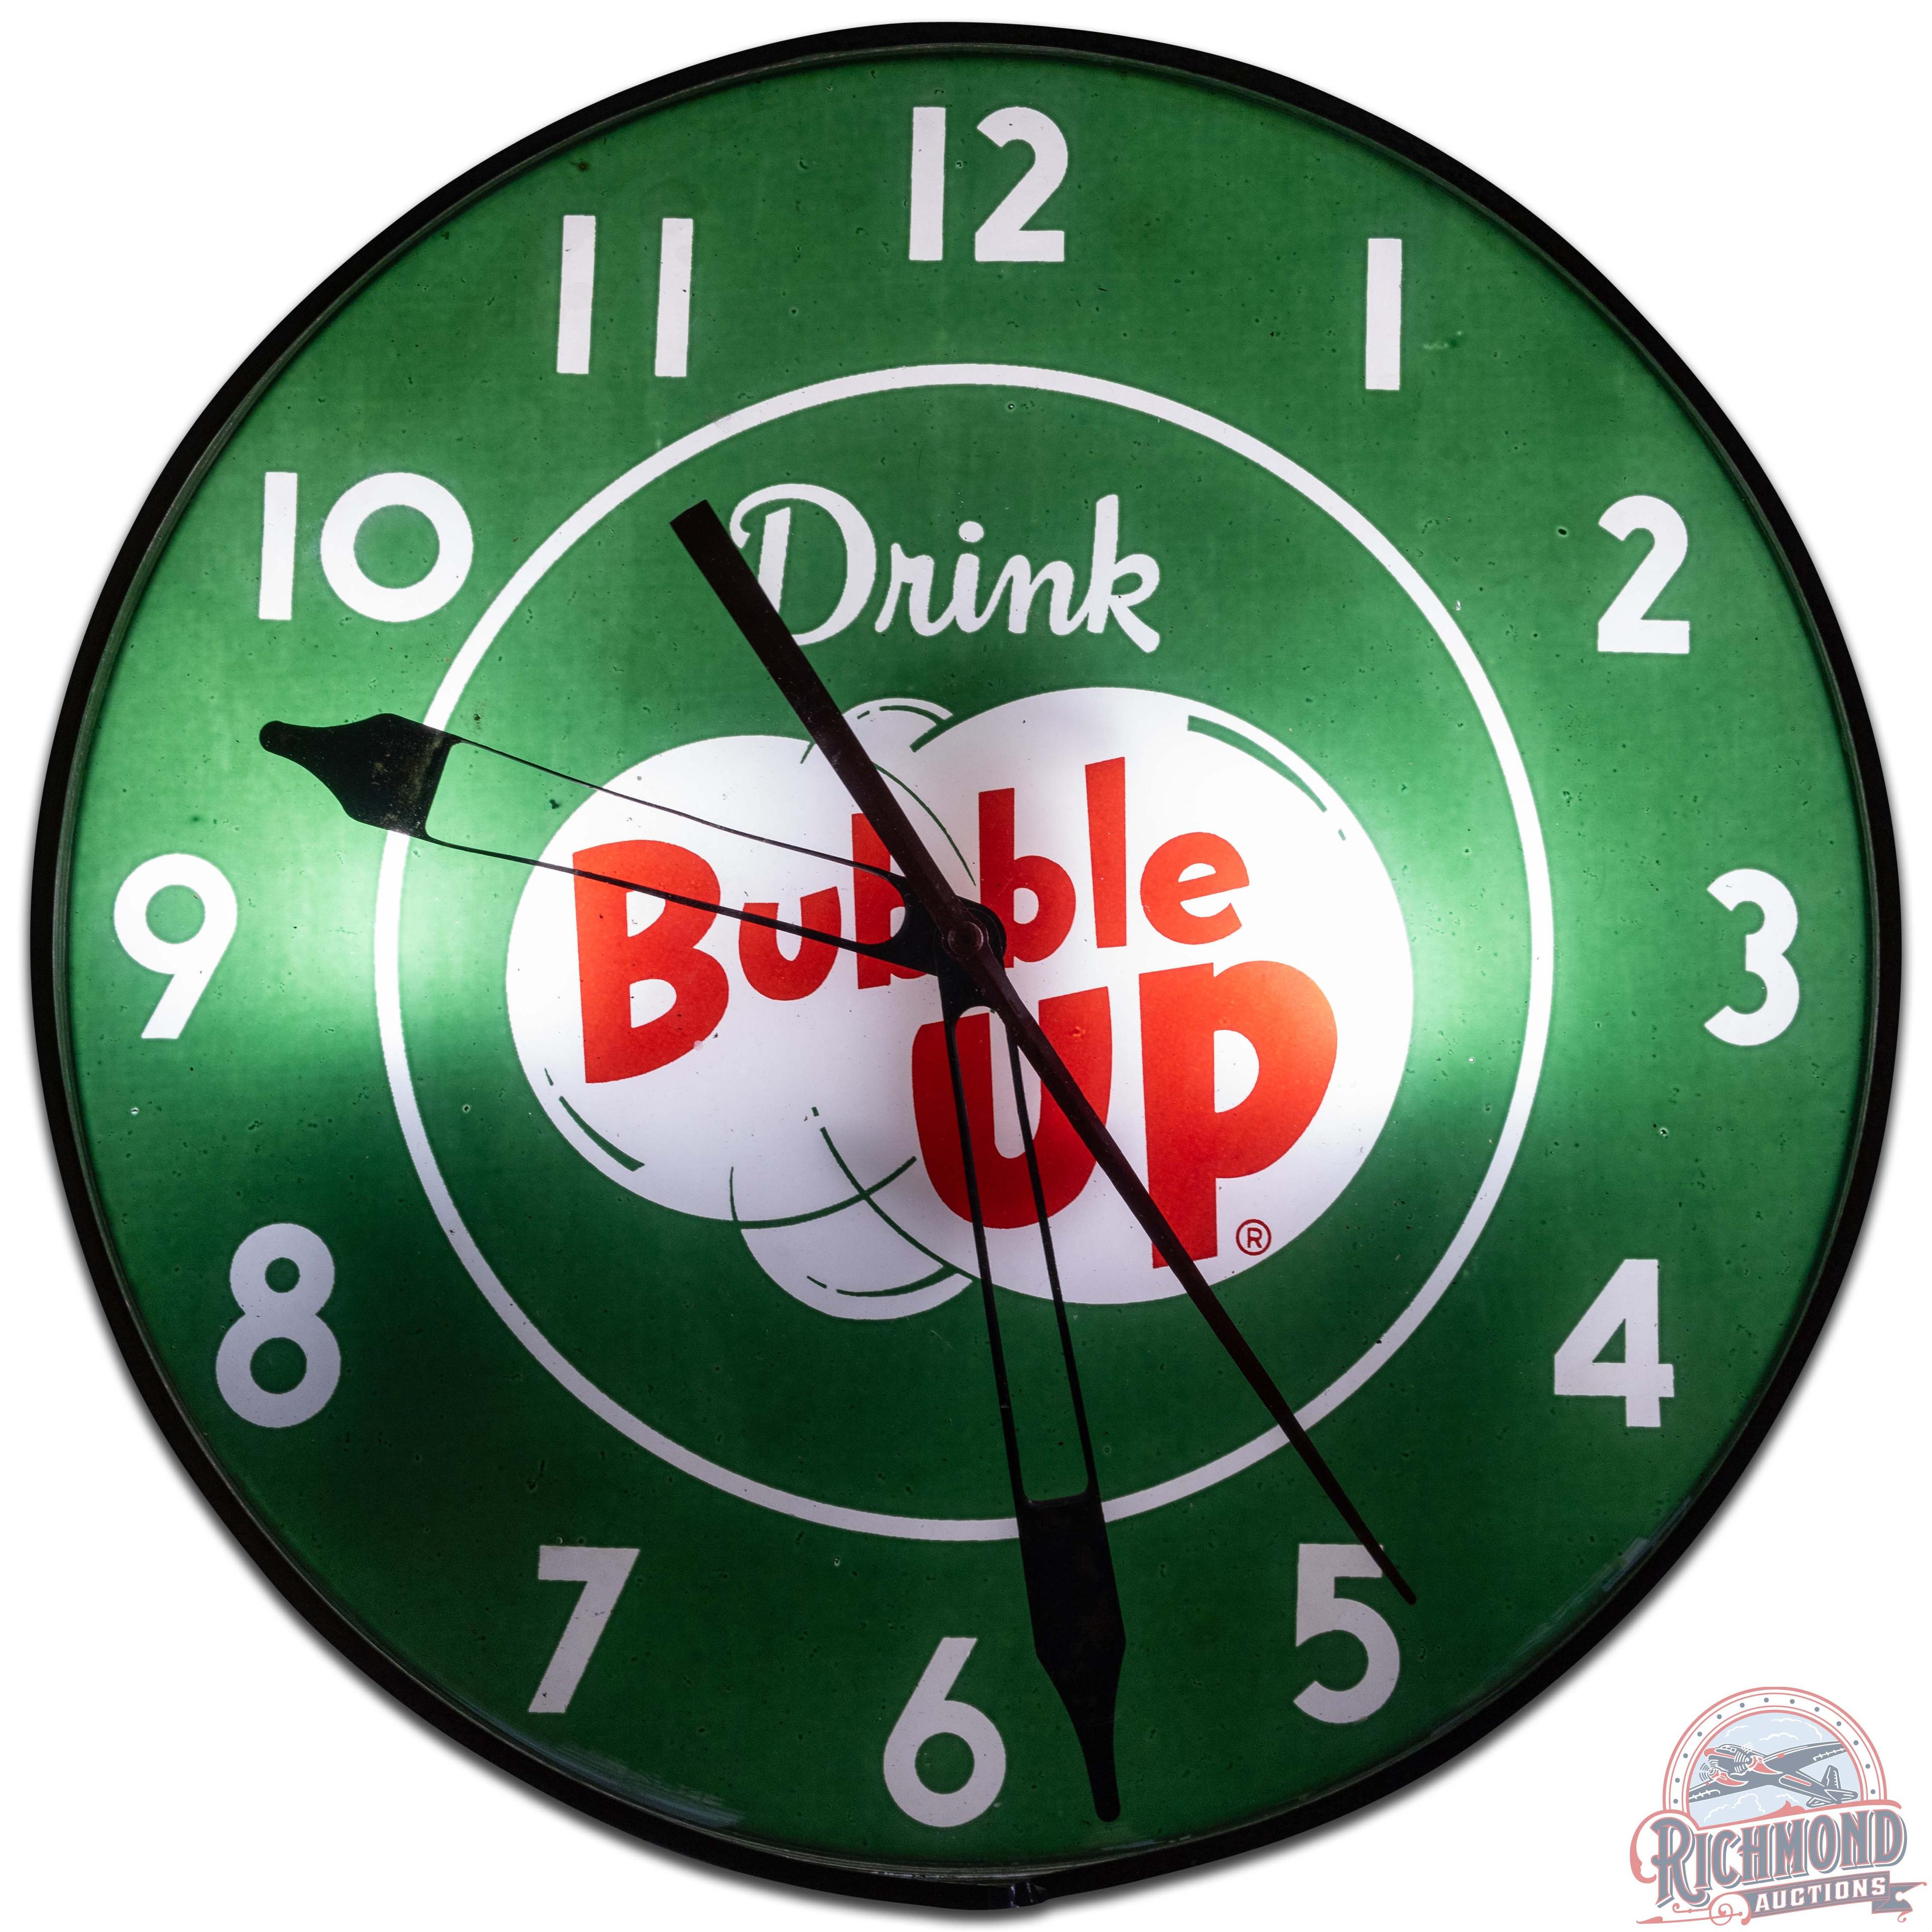 Drink Bubble Up 15" American Time Corp. Advertising Clock w/ Logo